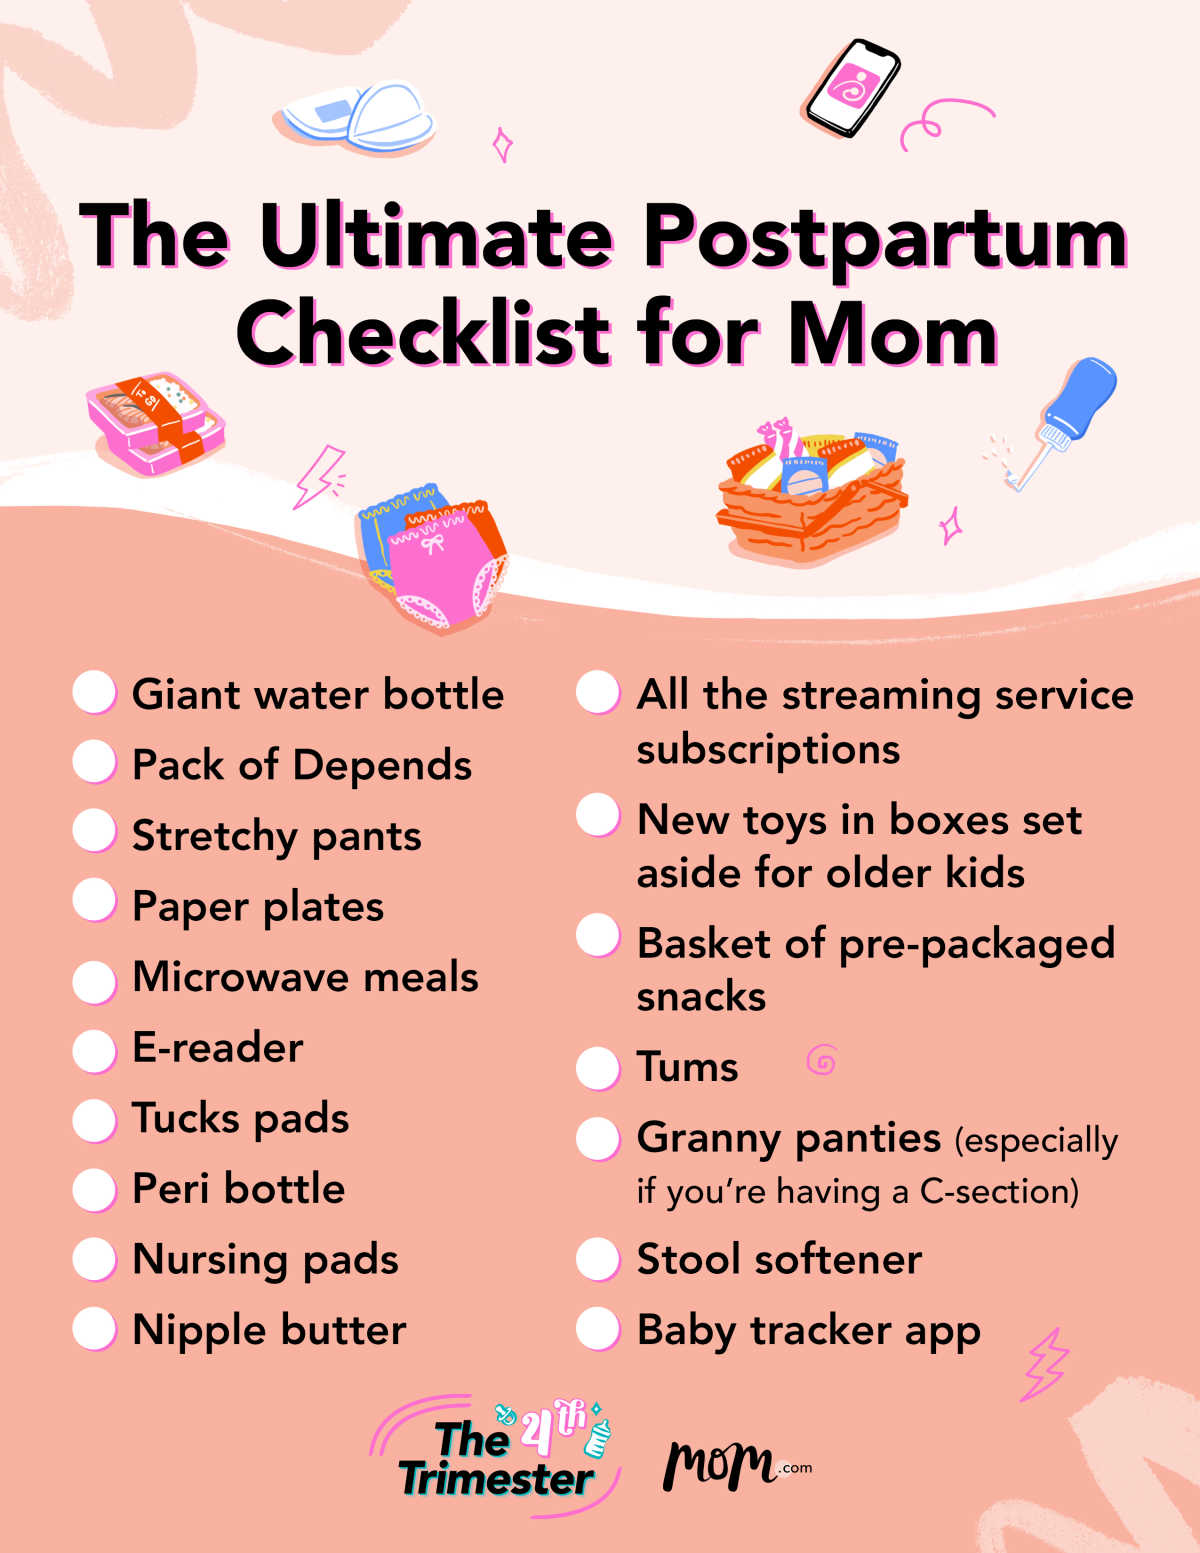 Postpartum Essentials for Mom and Baby - Baby Chick